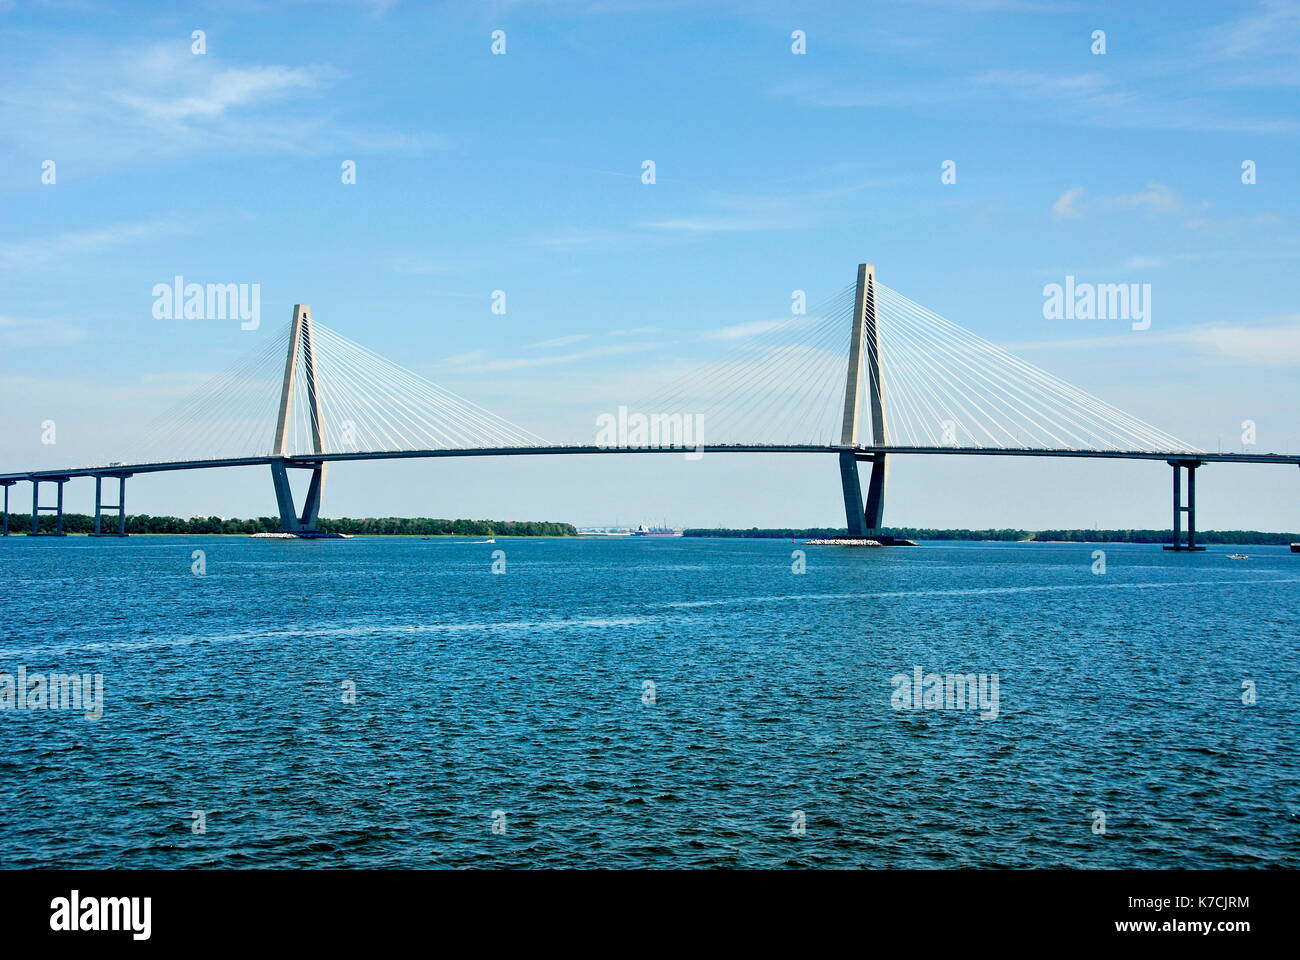 The Arthur Ravenel Jr. Bridge is a cable-stayed bridge over the Cooper River in South Carolina, USA, connecting downtown Charleston to Mount Pleasant. Stock Photo